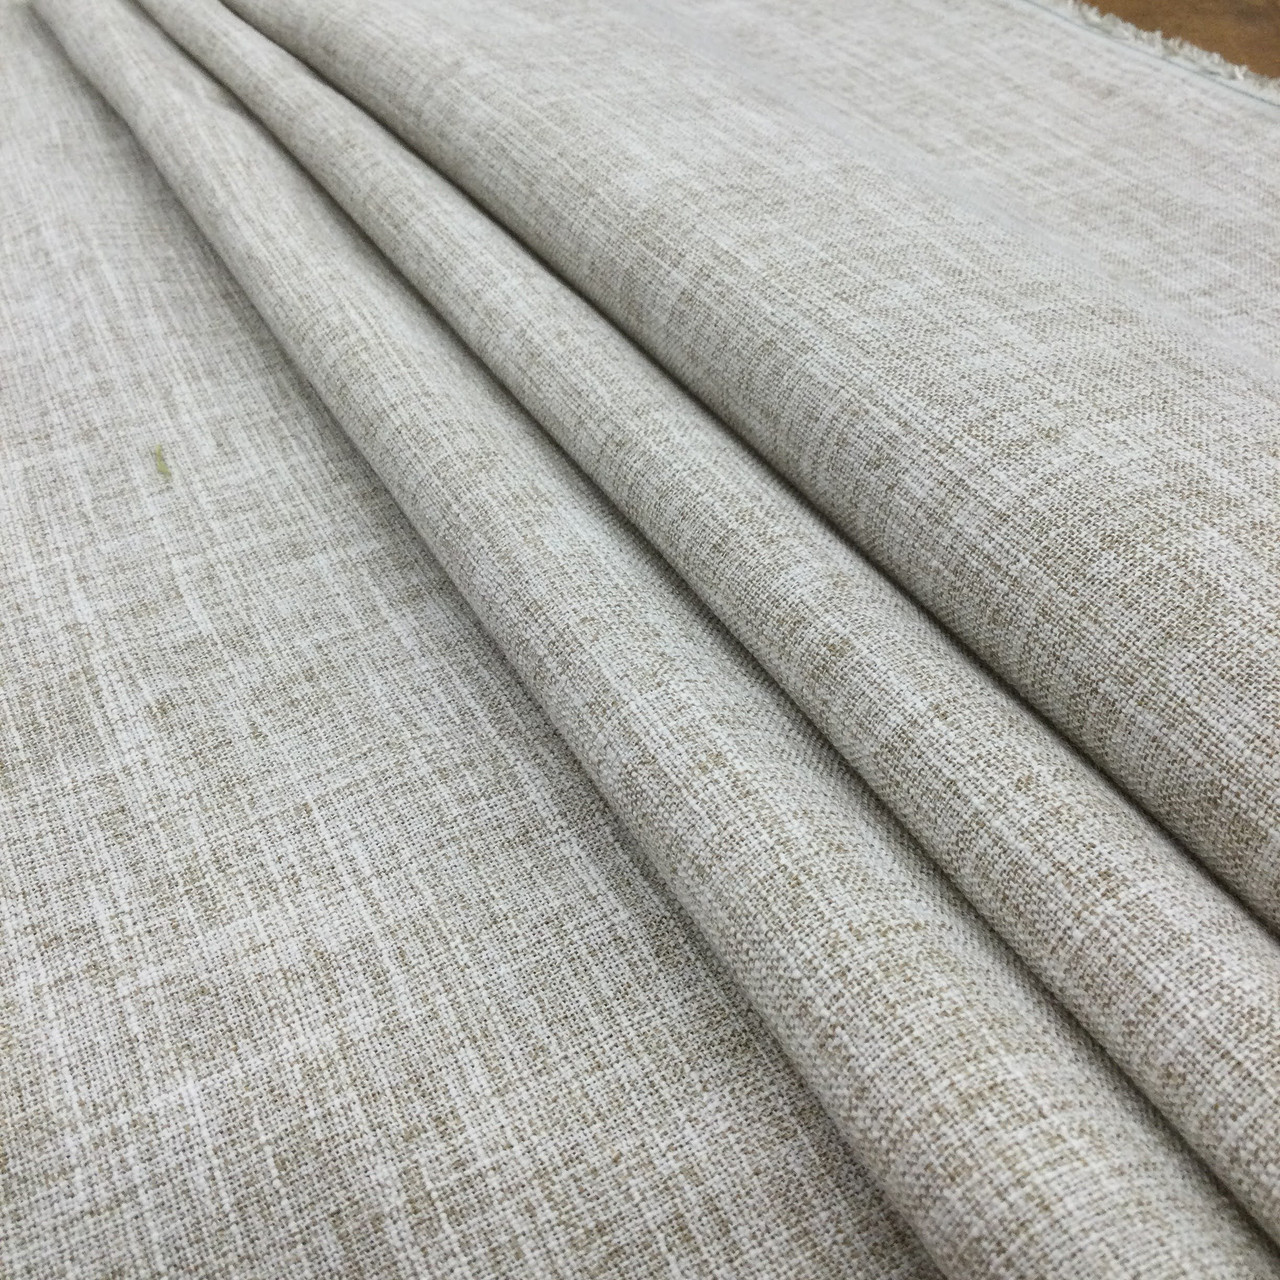 Linen Fabric Remnants for Your Projects